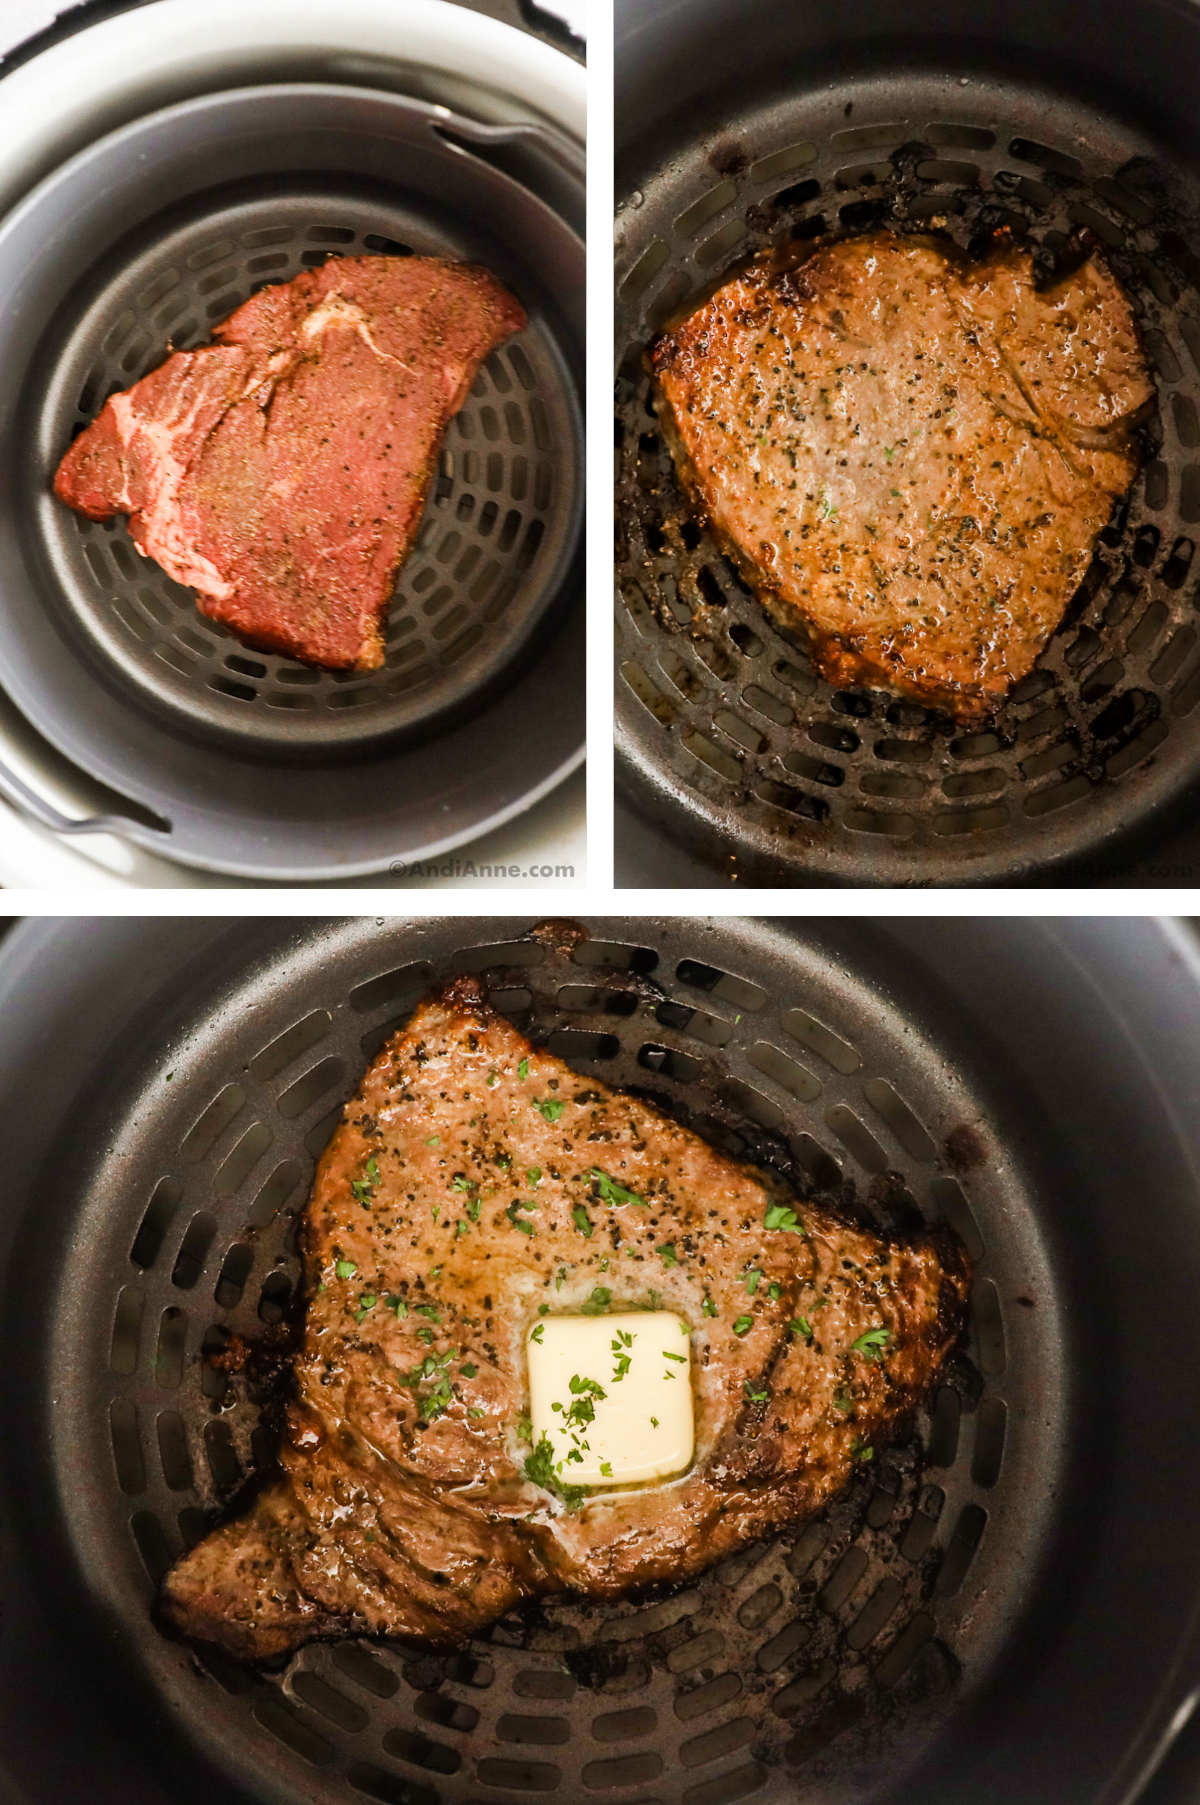 Air fryer basket with raw steak, then cooked steak, then seasoned with butter.